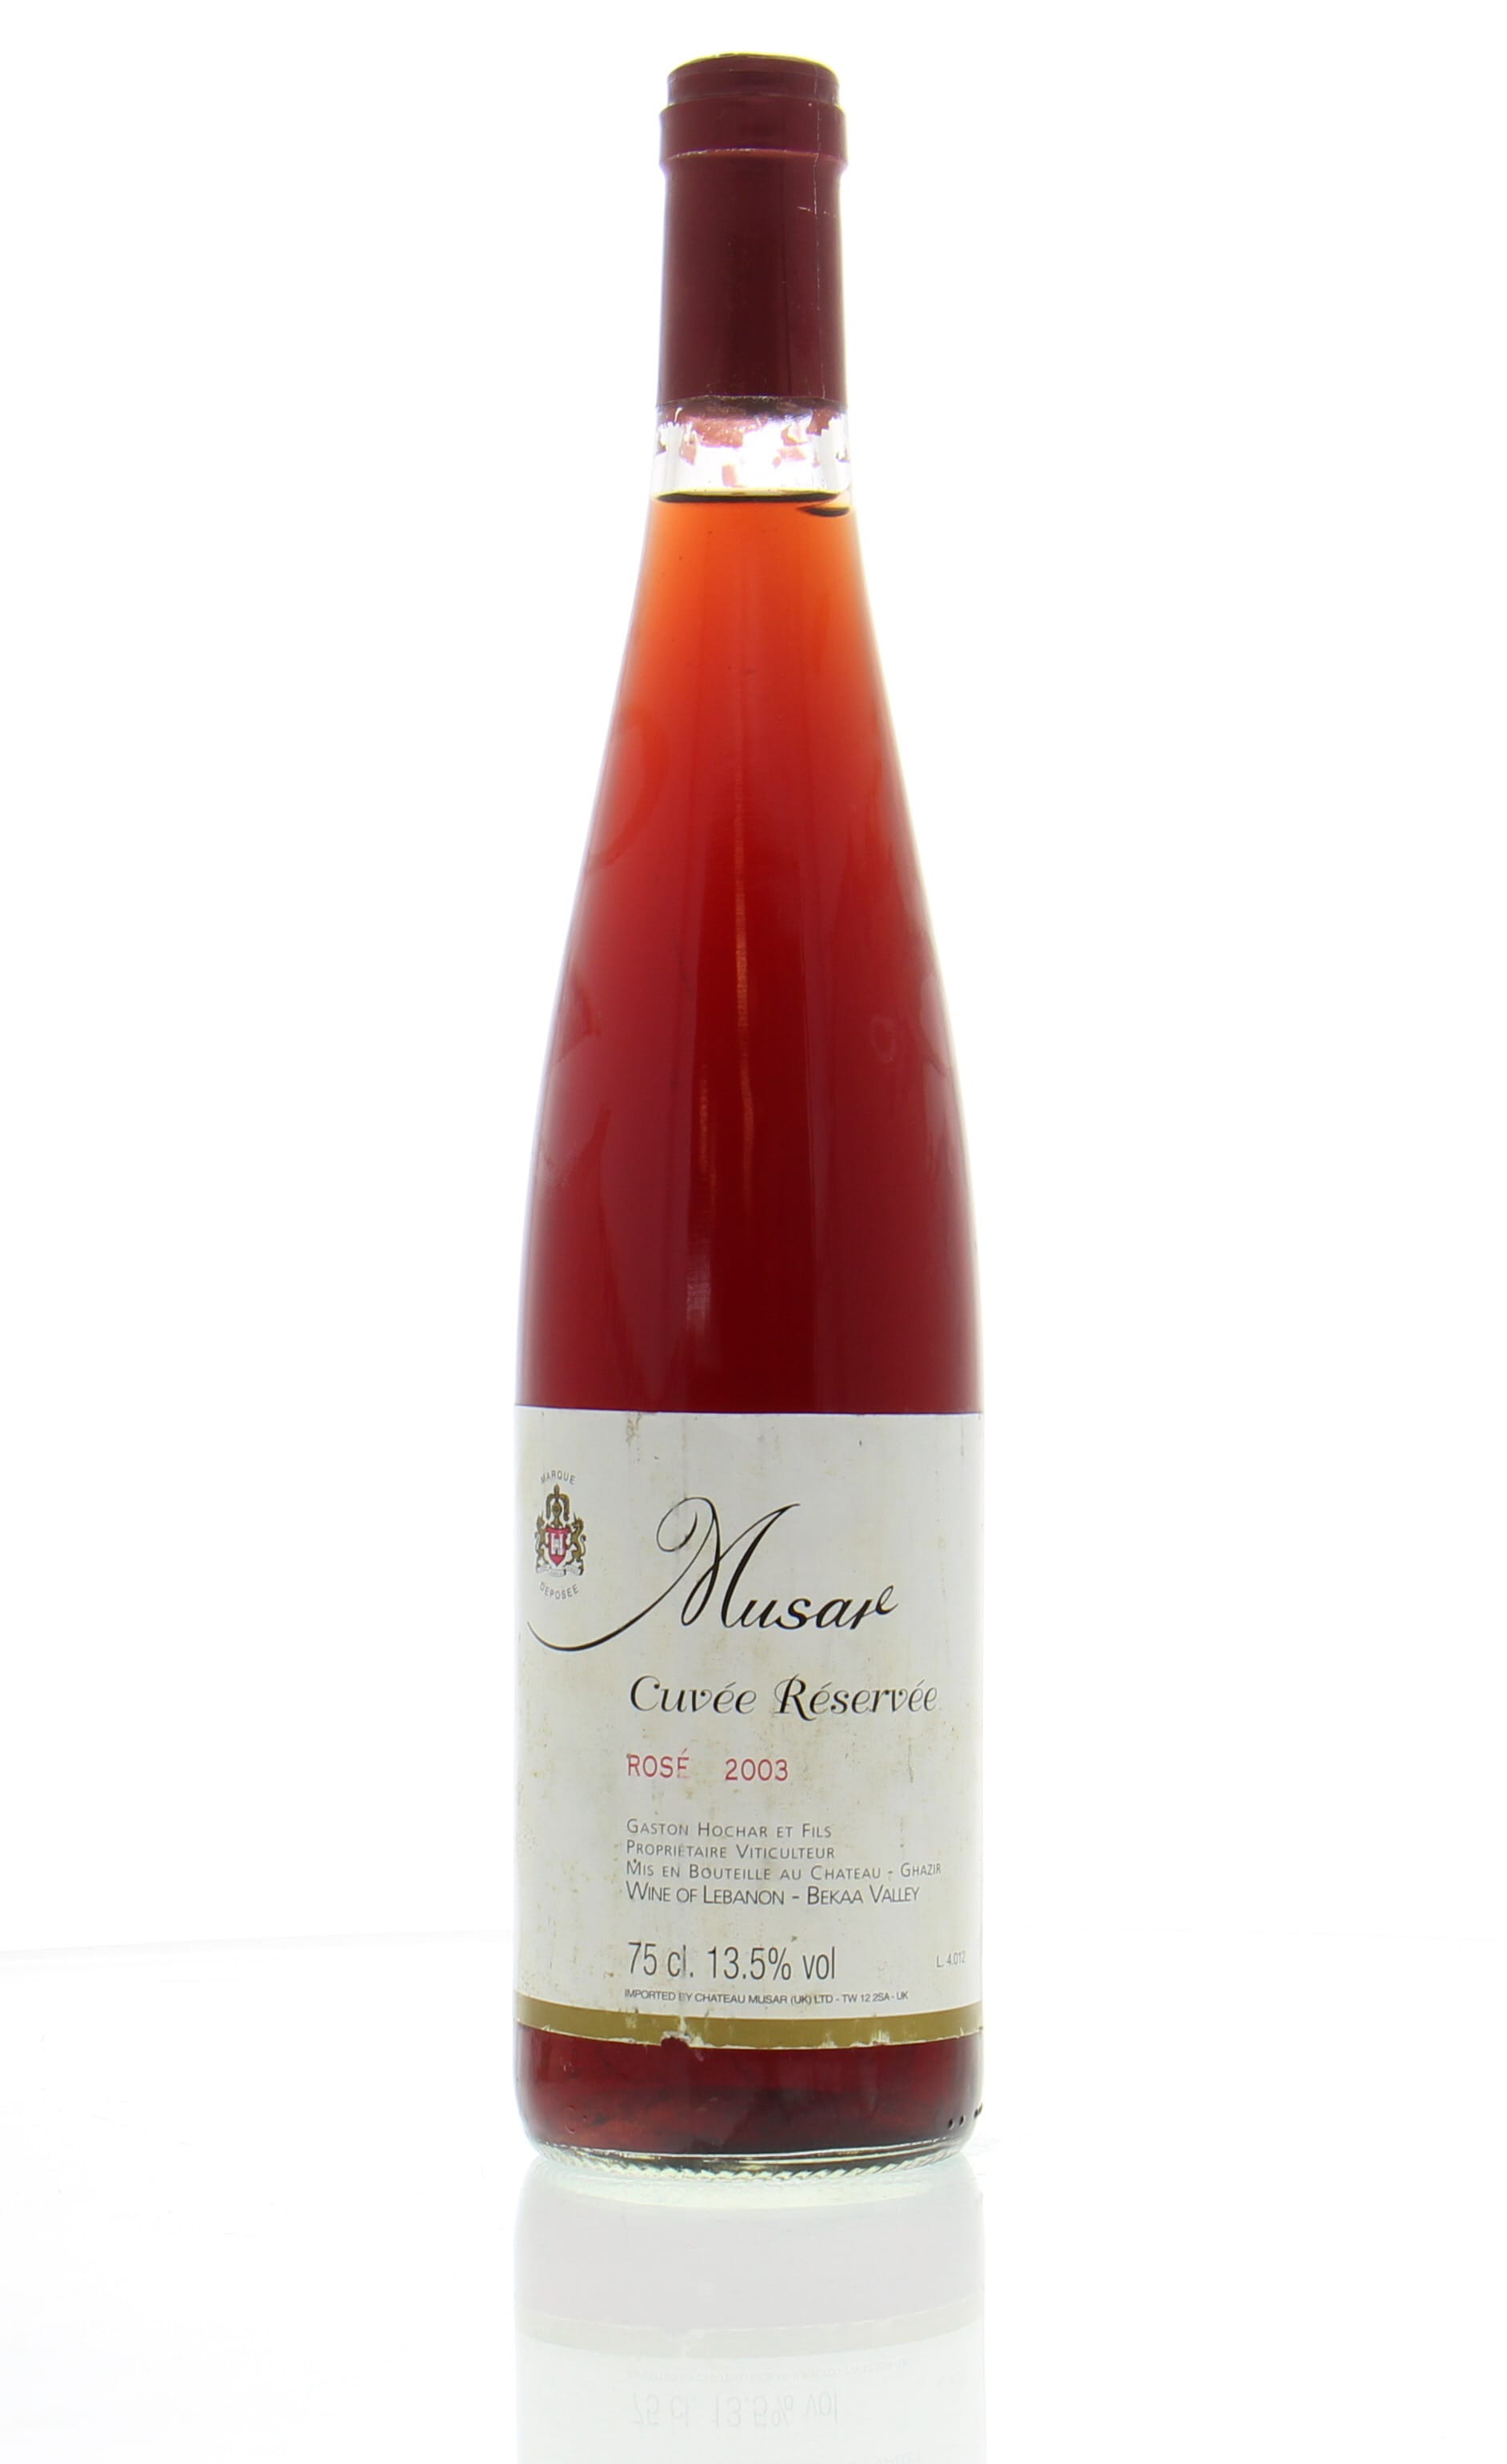 Chateau Musar - Cuvee Reservee Rose 2003